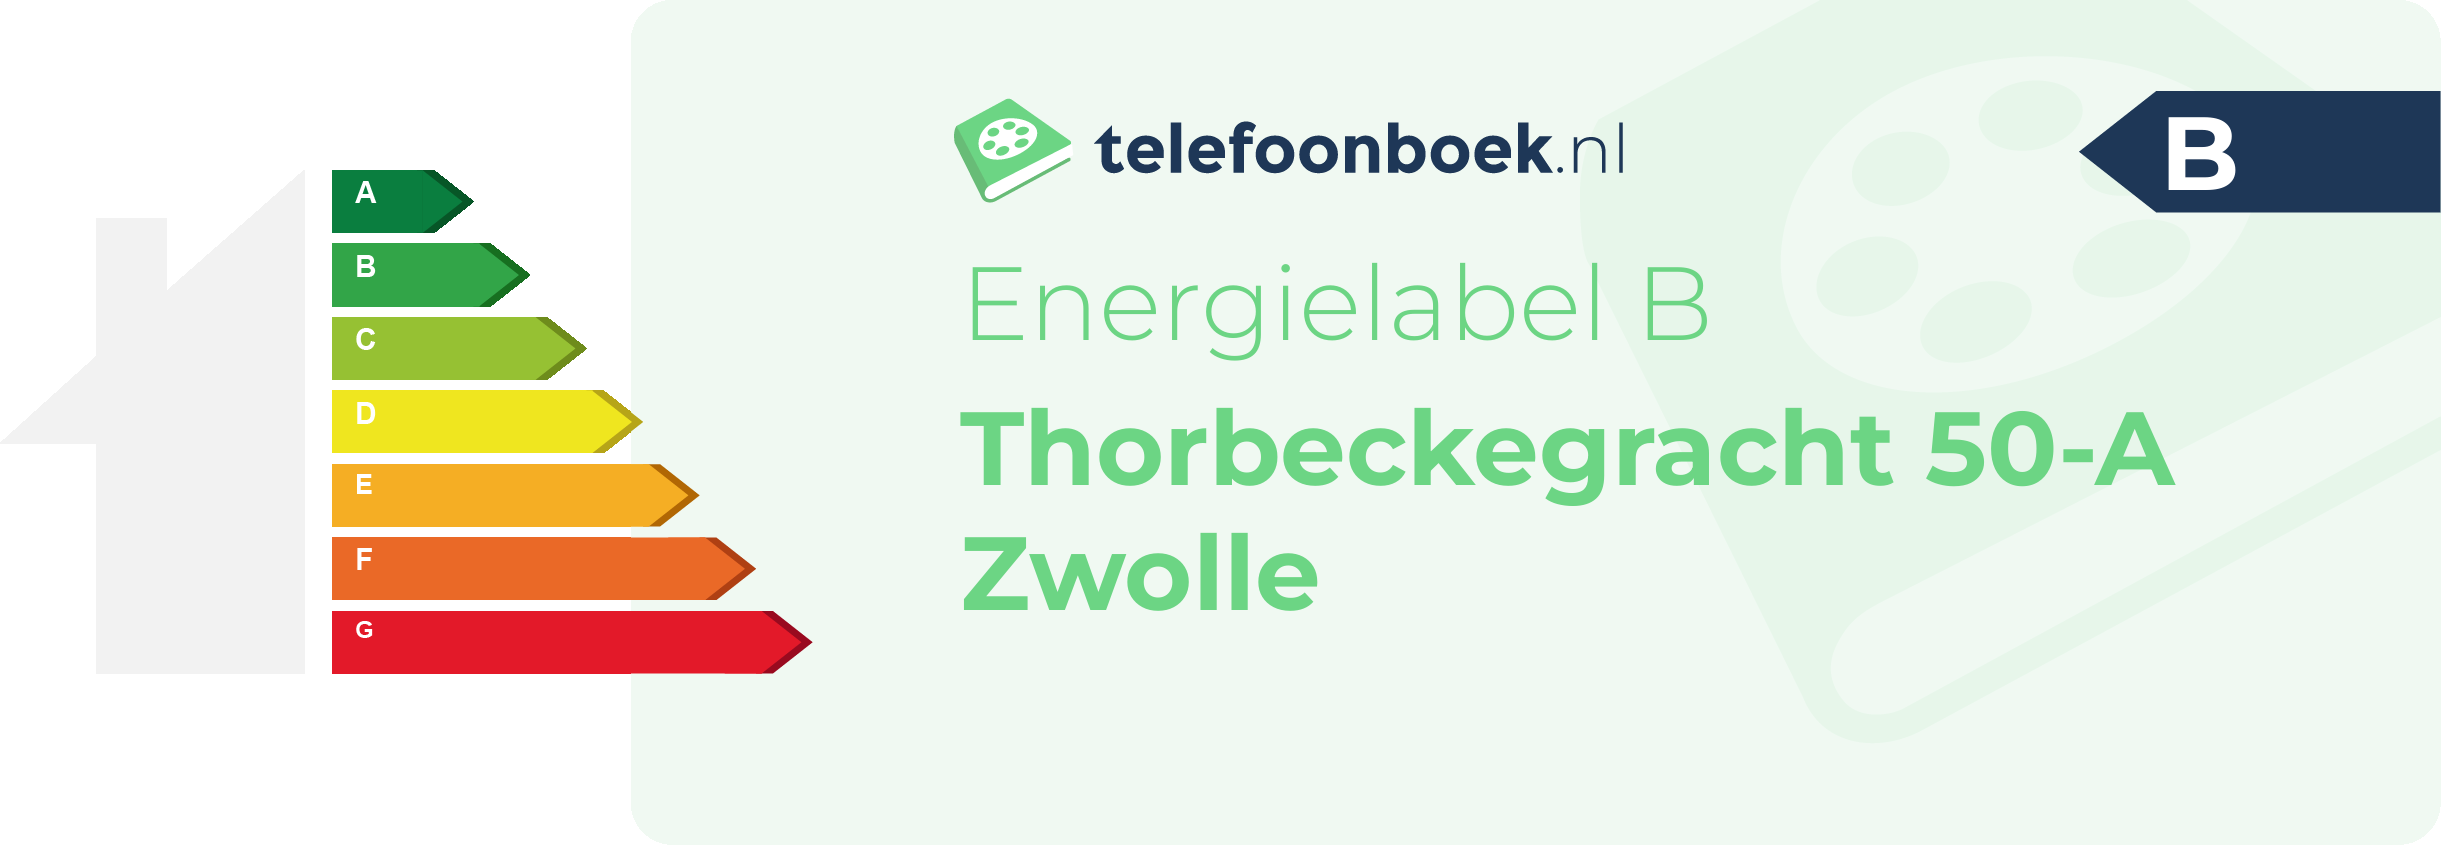 Energielabel Thorbeckegracht 50-A Zwolle